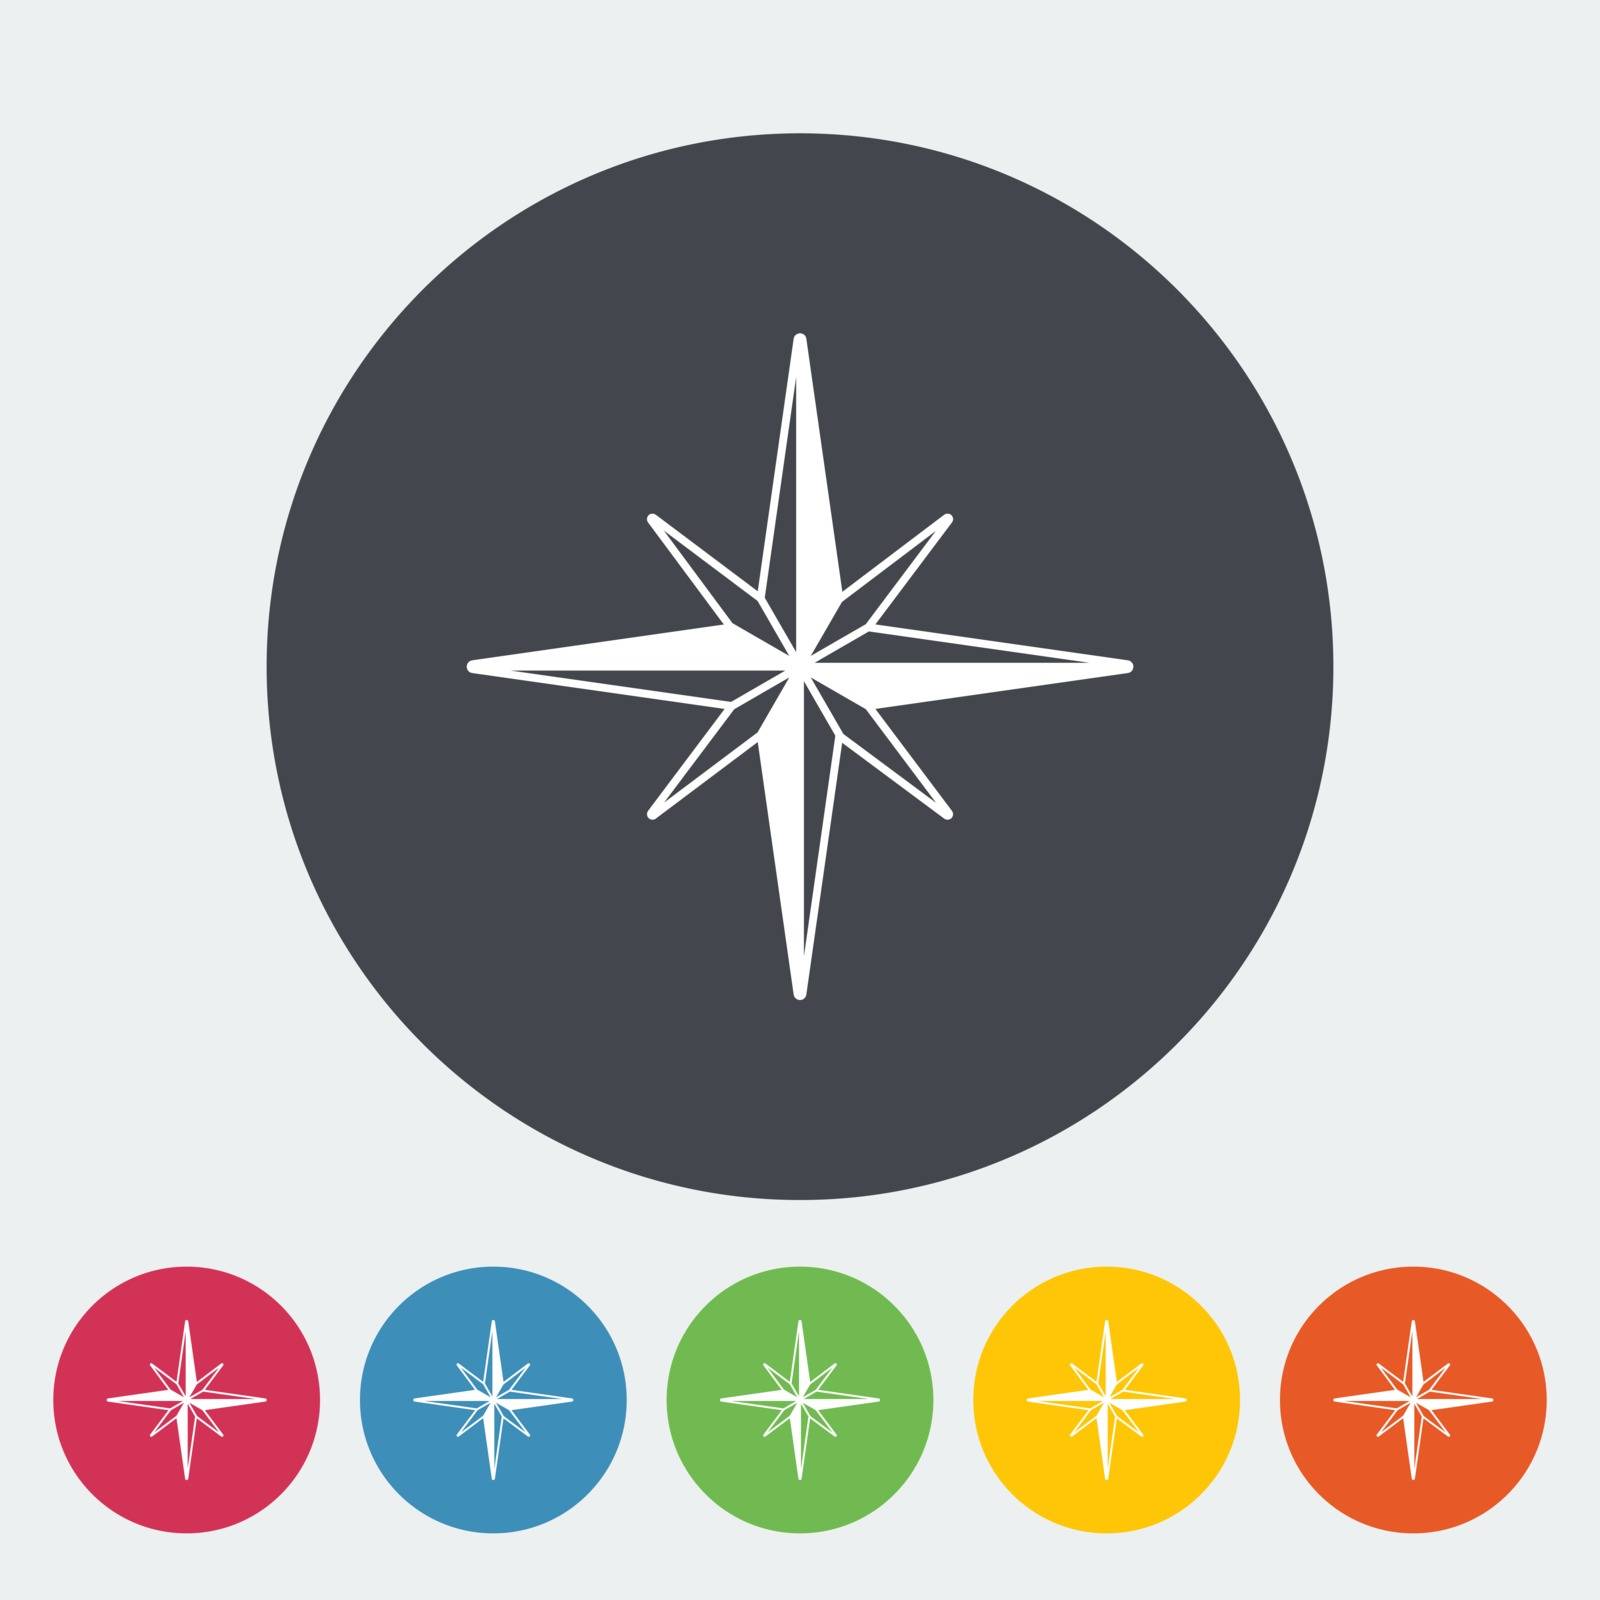 Wind rose. Single flat icon on the circle button. Vector illustration.